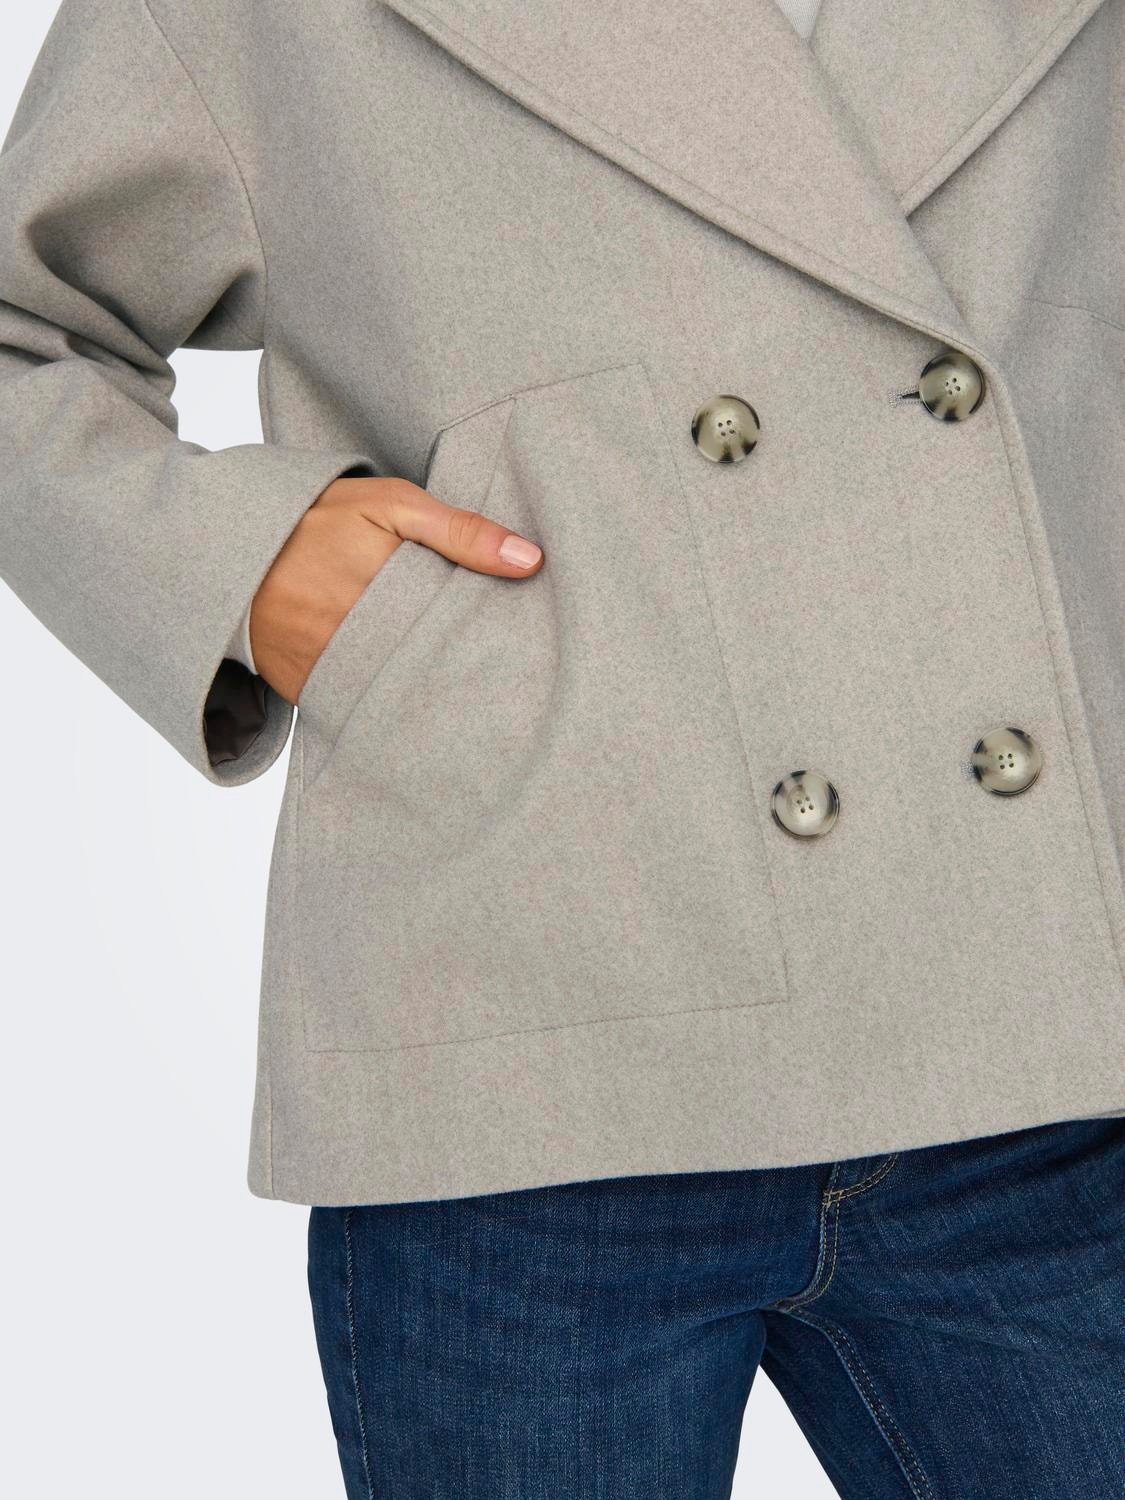 ONLY Blazer jacket with double buttons -Simply Taupe - 15315503